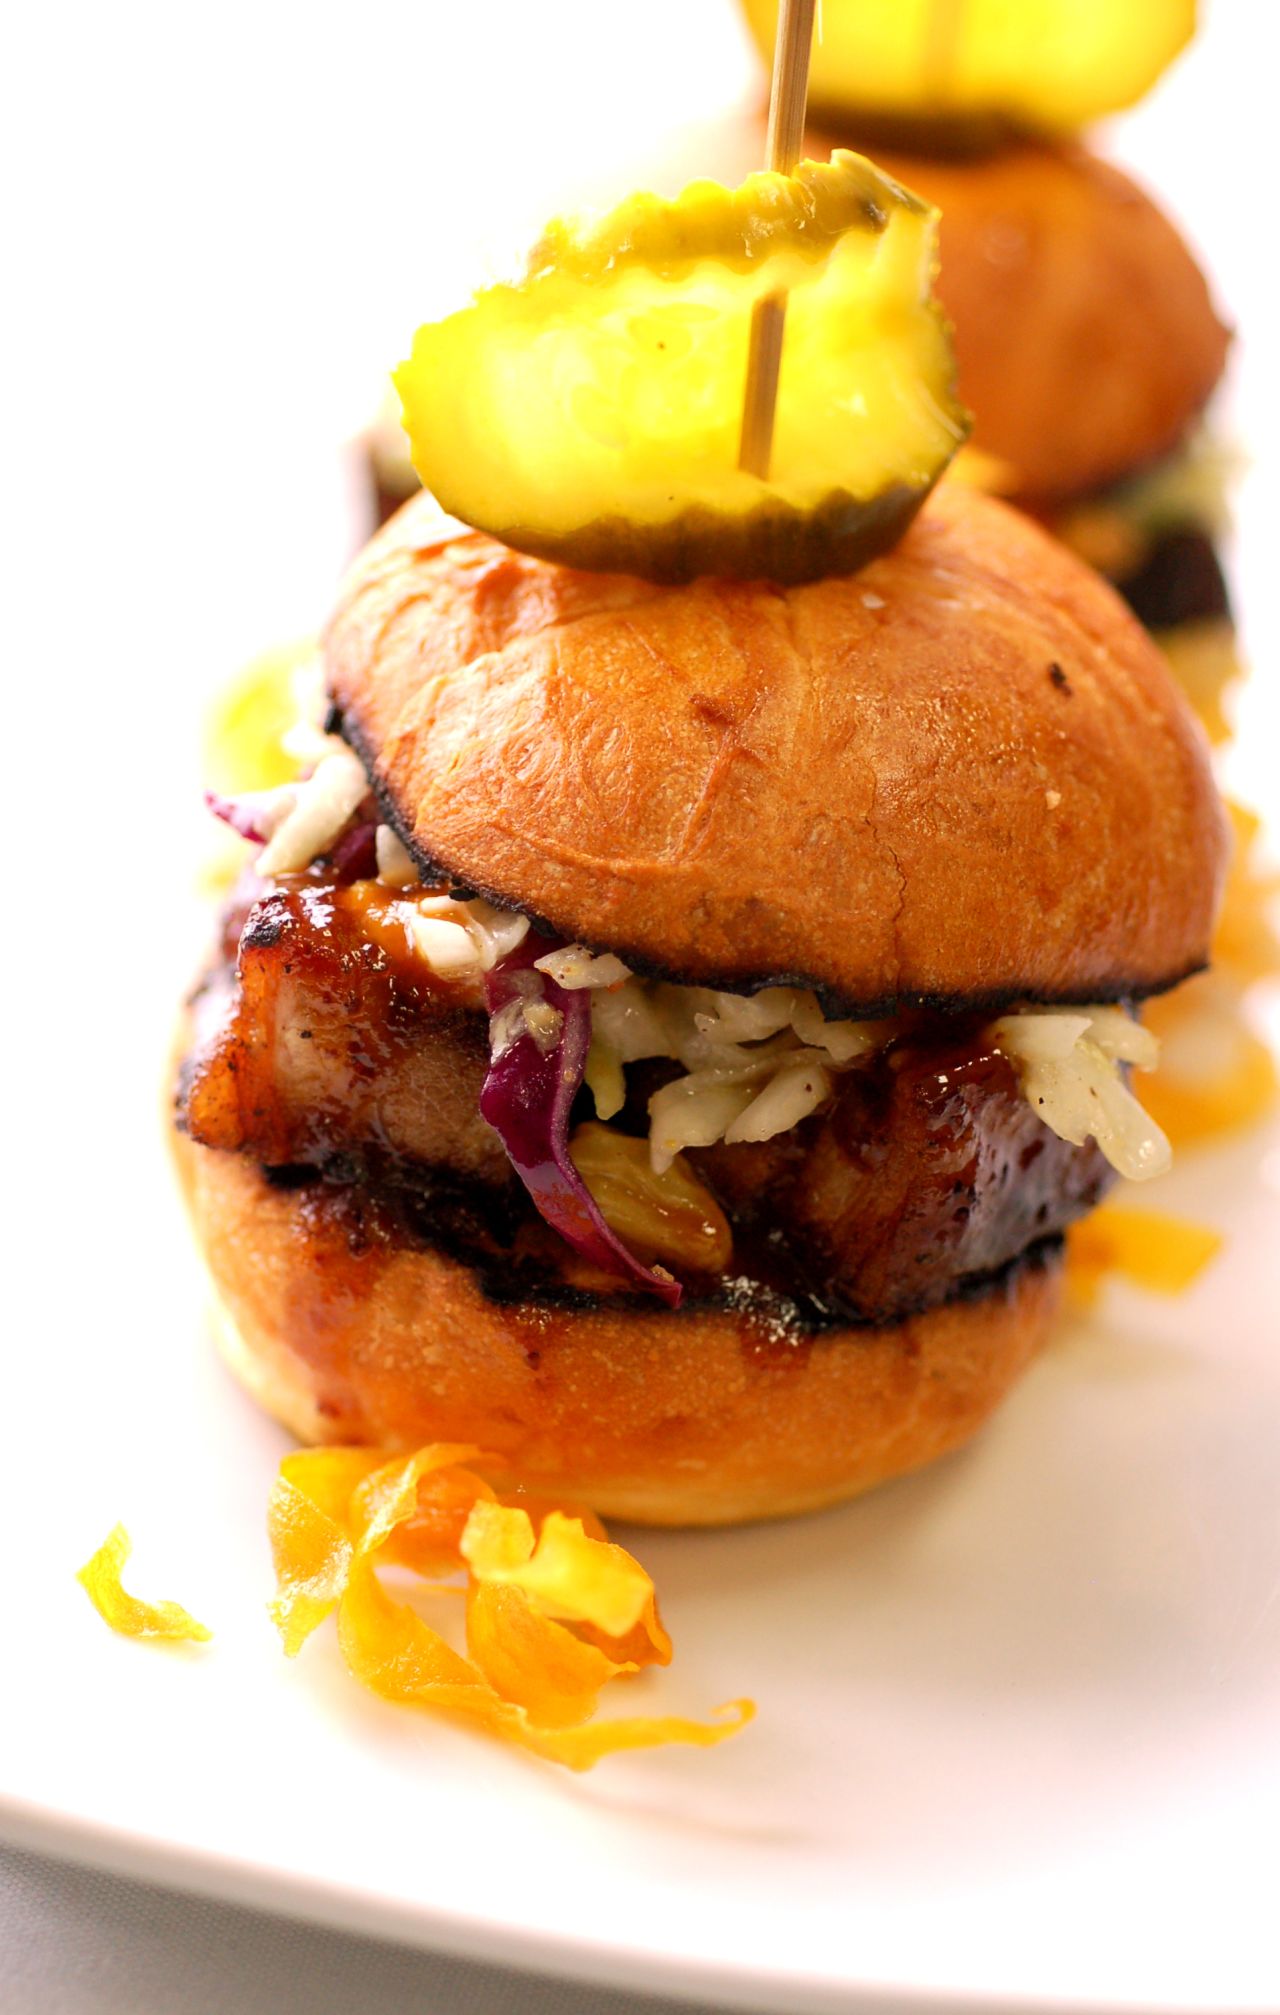 Pork belly sliders, a customer favorite at One Flew South.